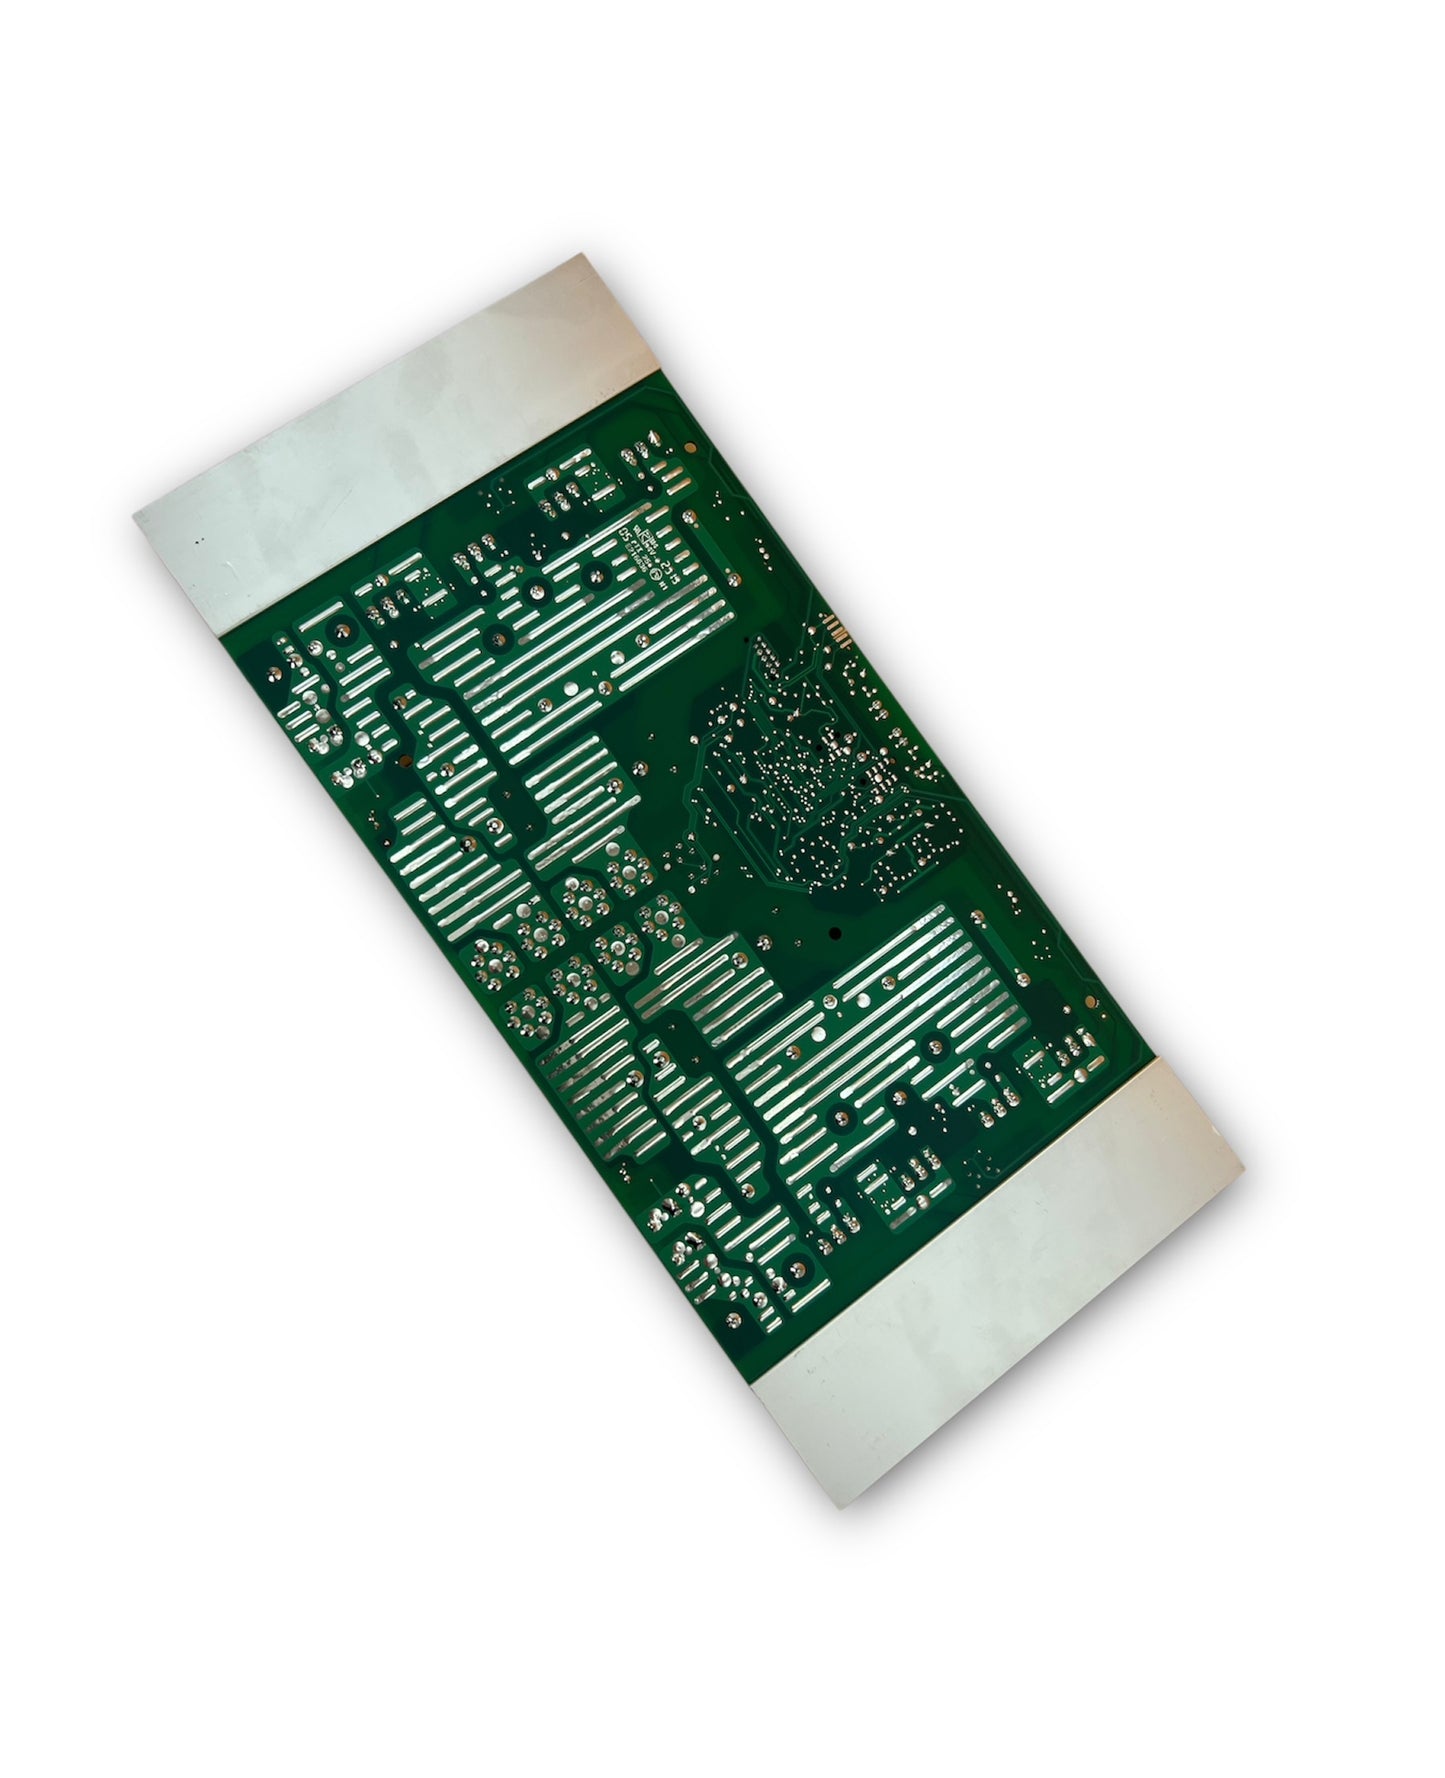 Fisher & Paykel Induction Power Board 4 ZONE CI754 OEM - DCS - 534851, SERVICE NUMBER - 75.96475.633 PARTS OF CANADA LTD